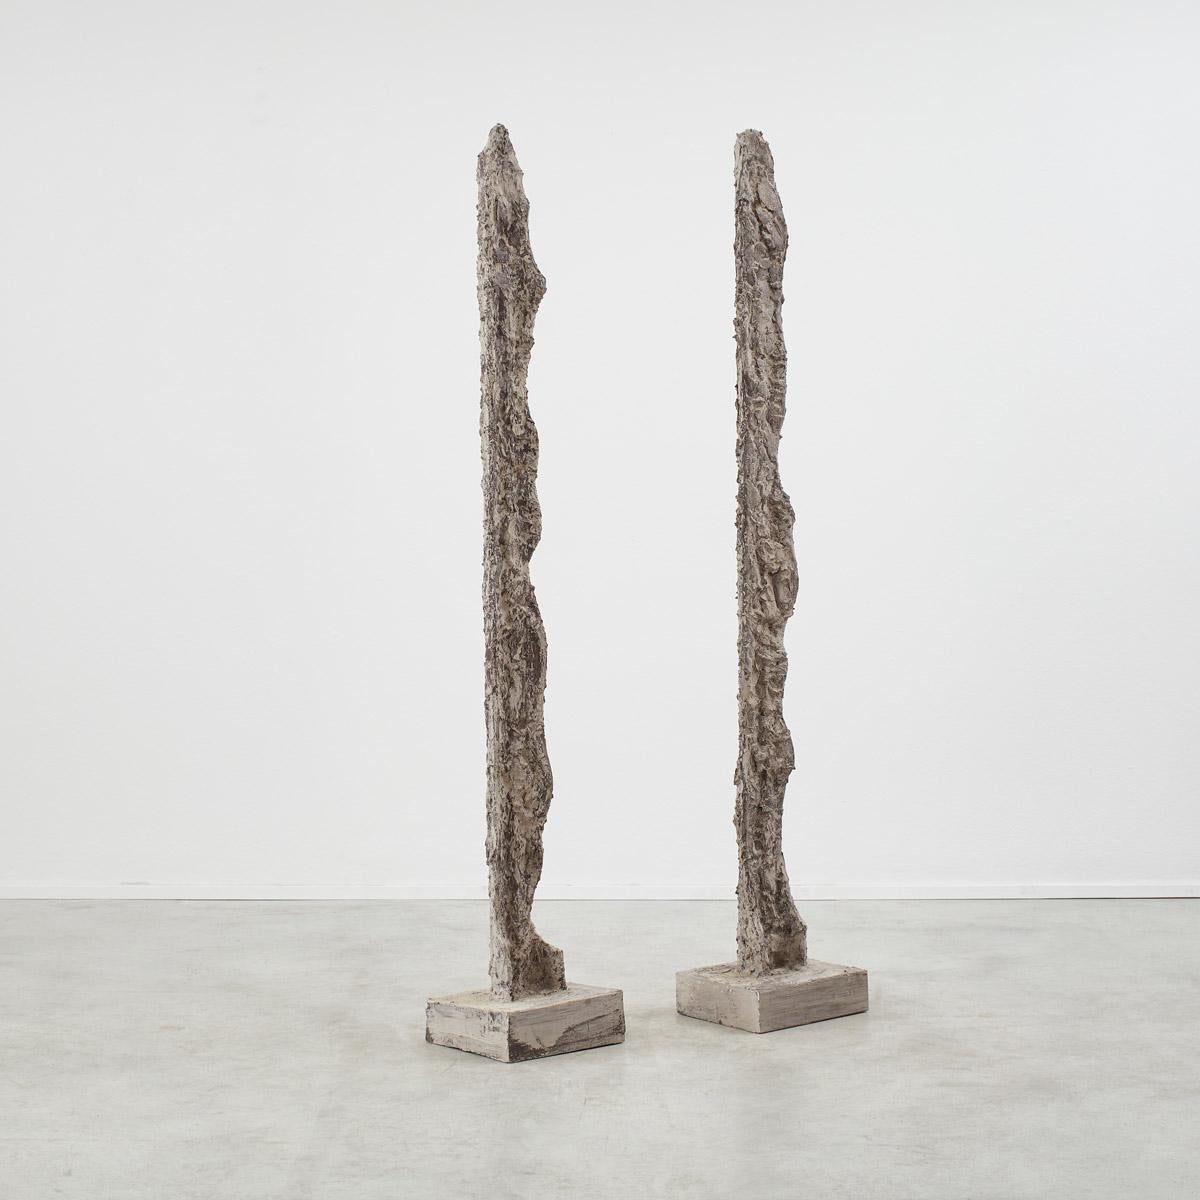 This pair of rocky totem sculptures tower up like stalagmites in a cave. Formed of clay onto an internal skeleton which makes the pieces light in nature. The pair of sculptures are in good vintage condition with the rough texture allowing any wear